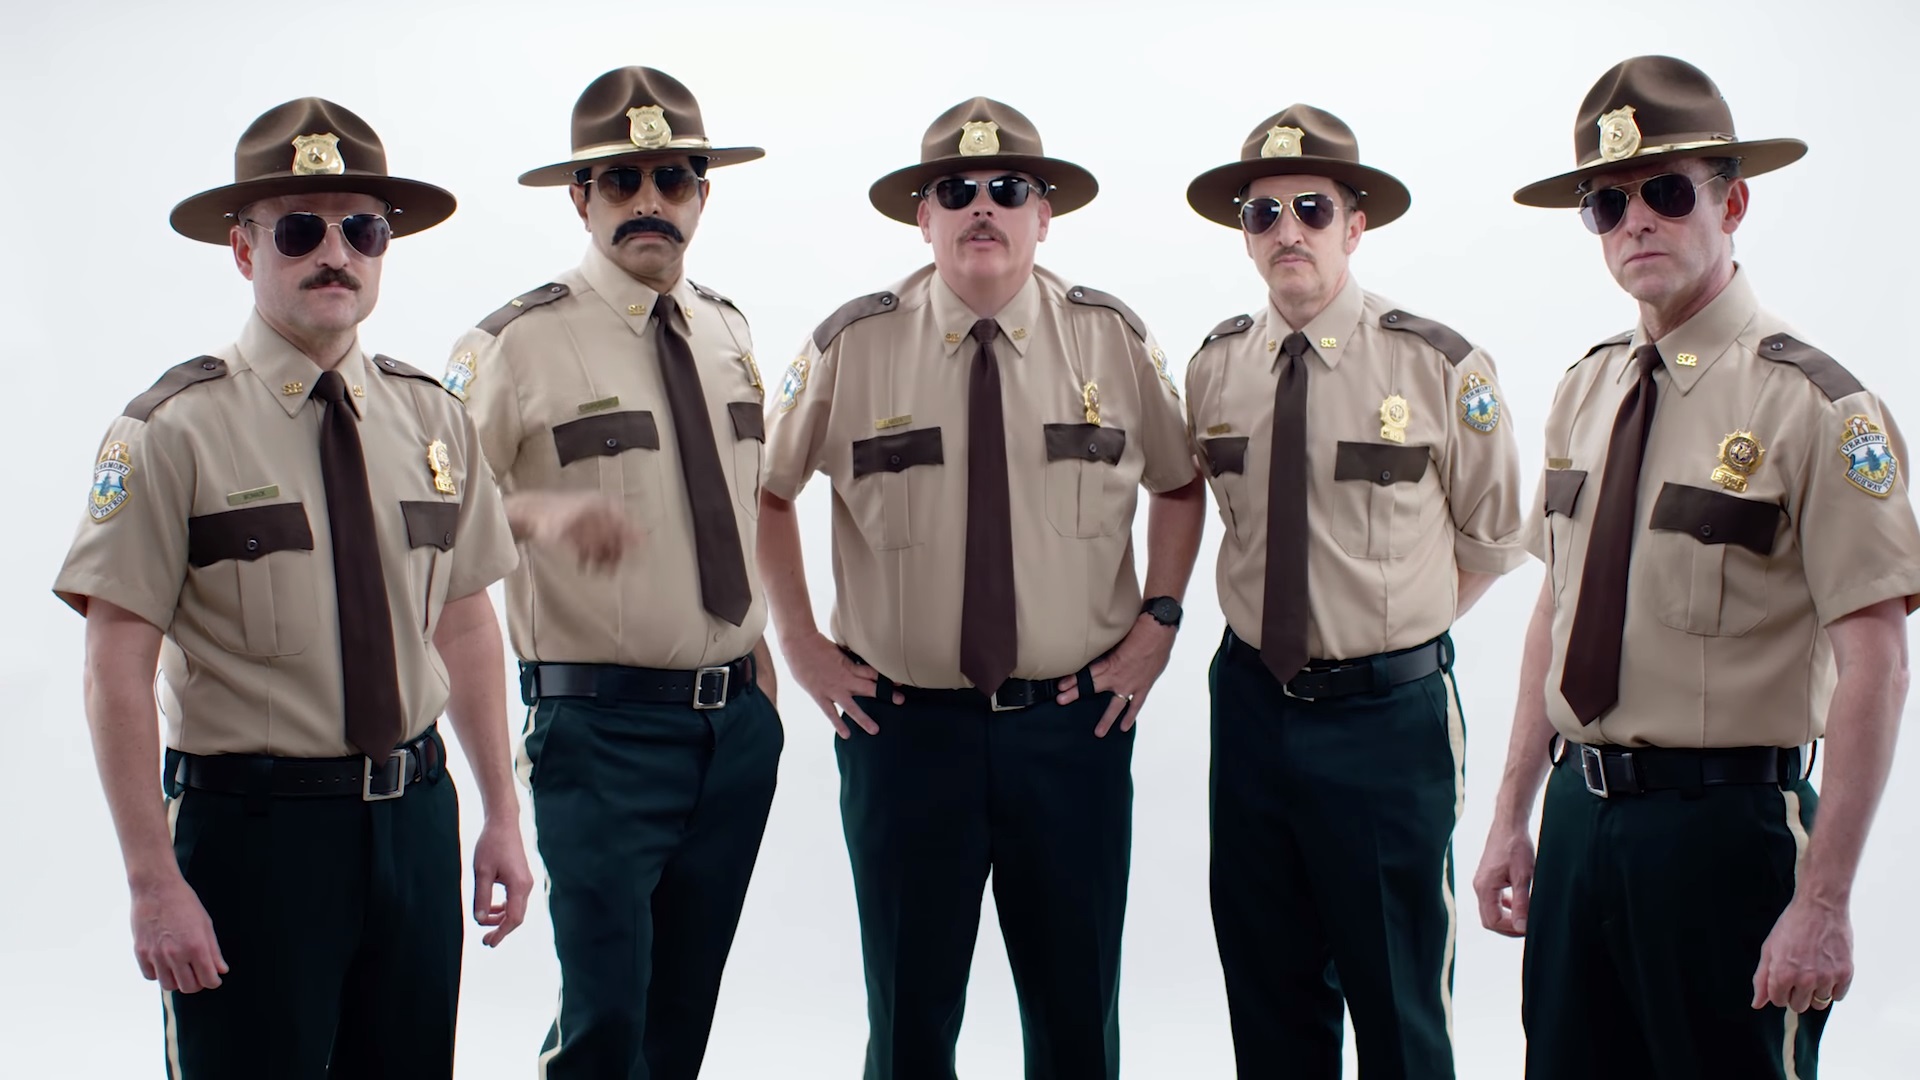 Watch The Cast Of SUPER TROOPERS Roast Each Other.